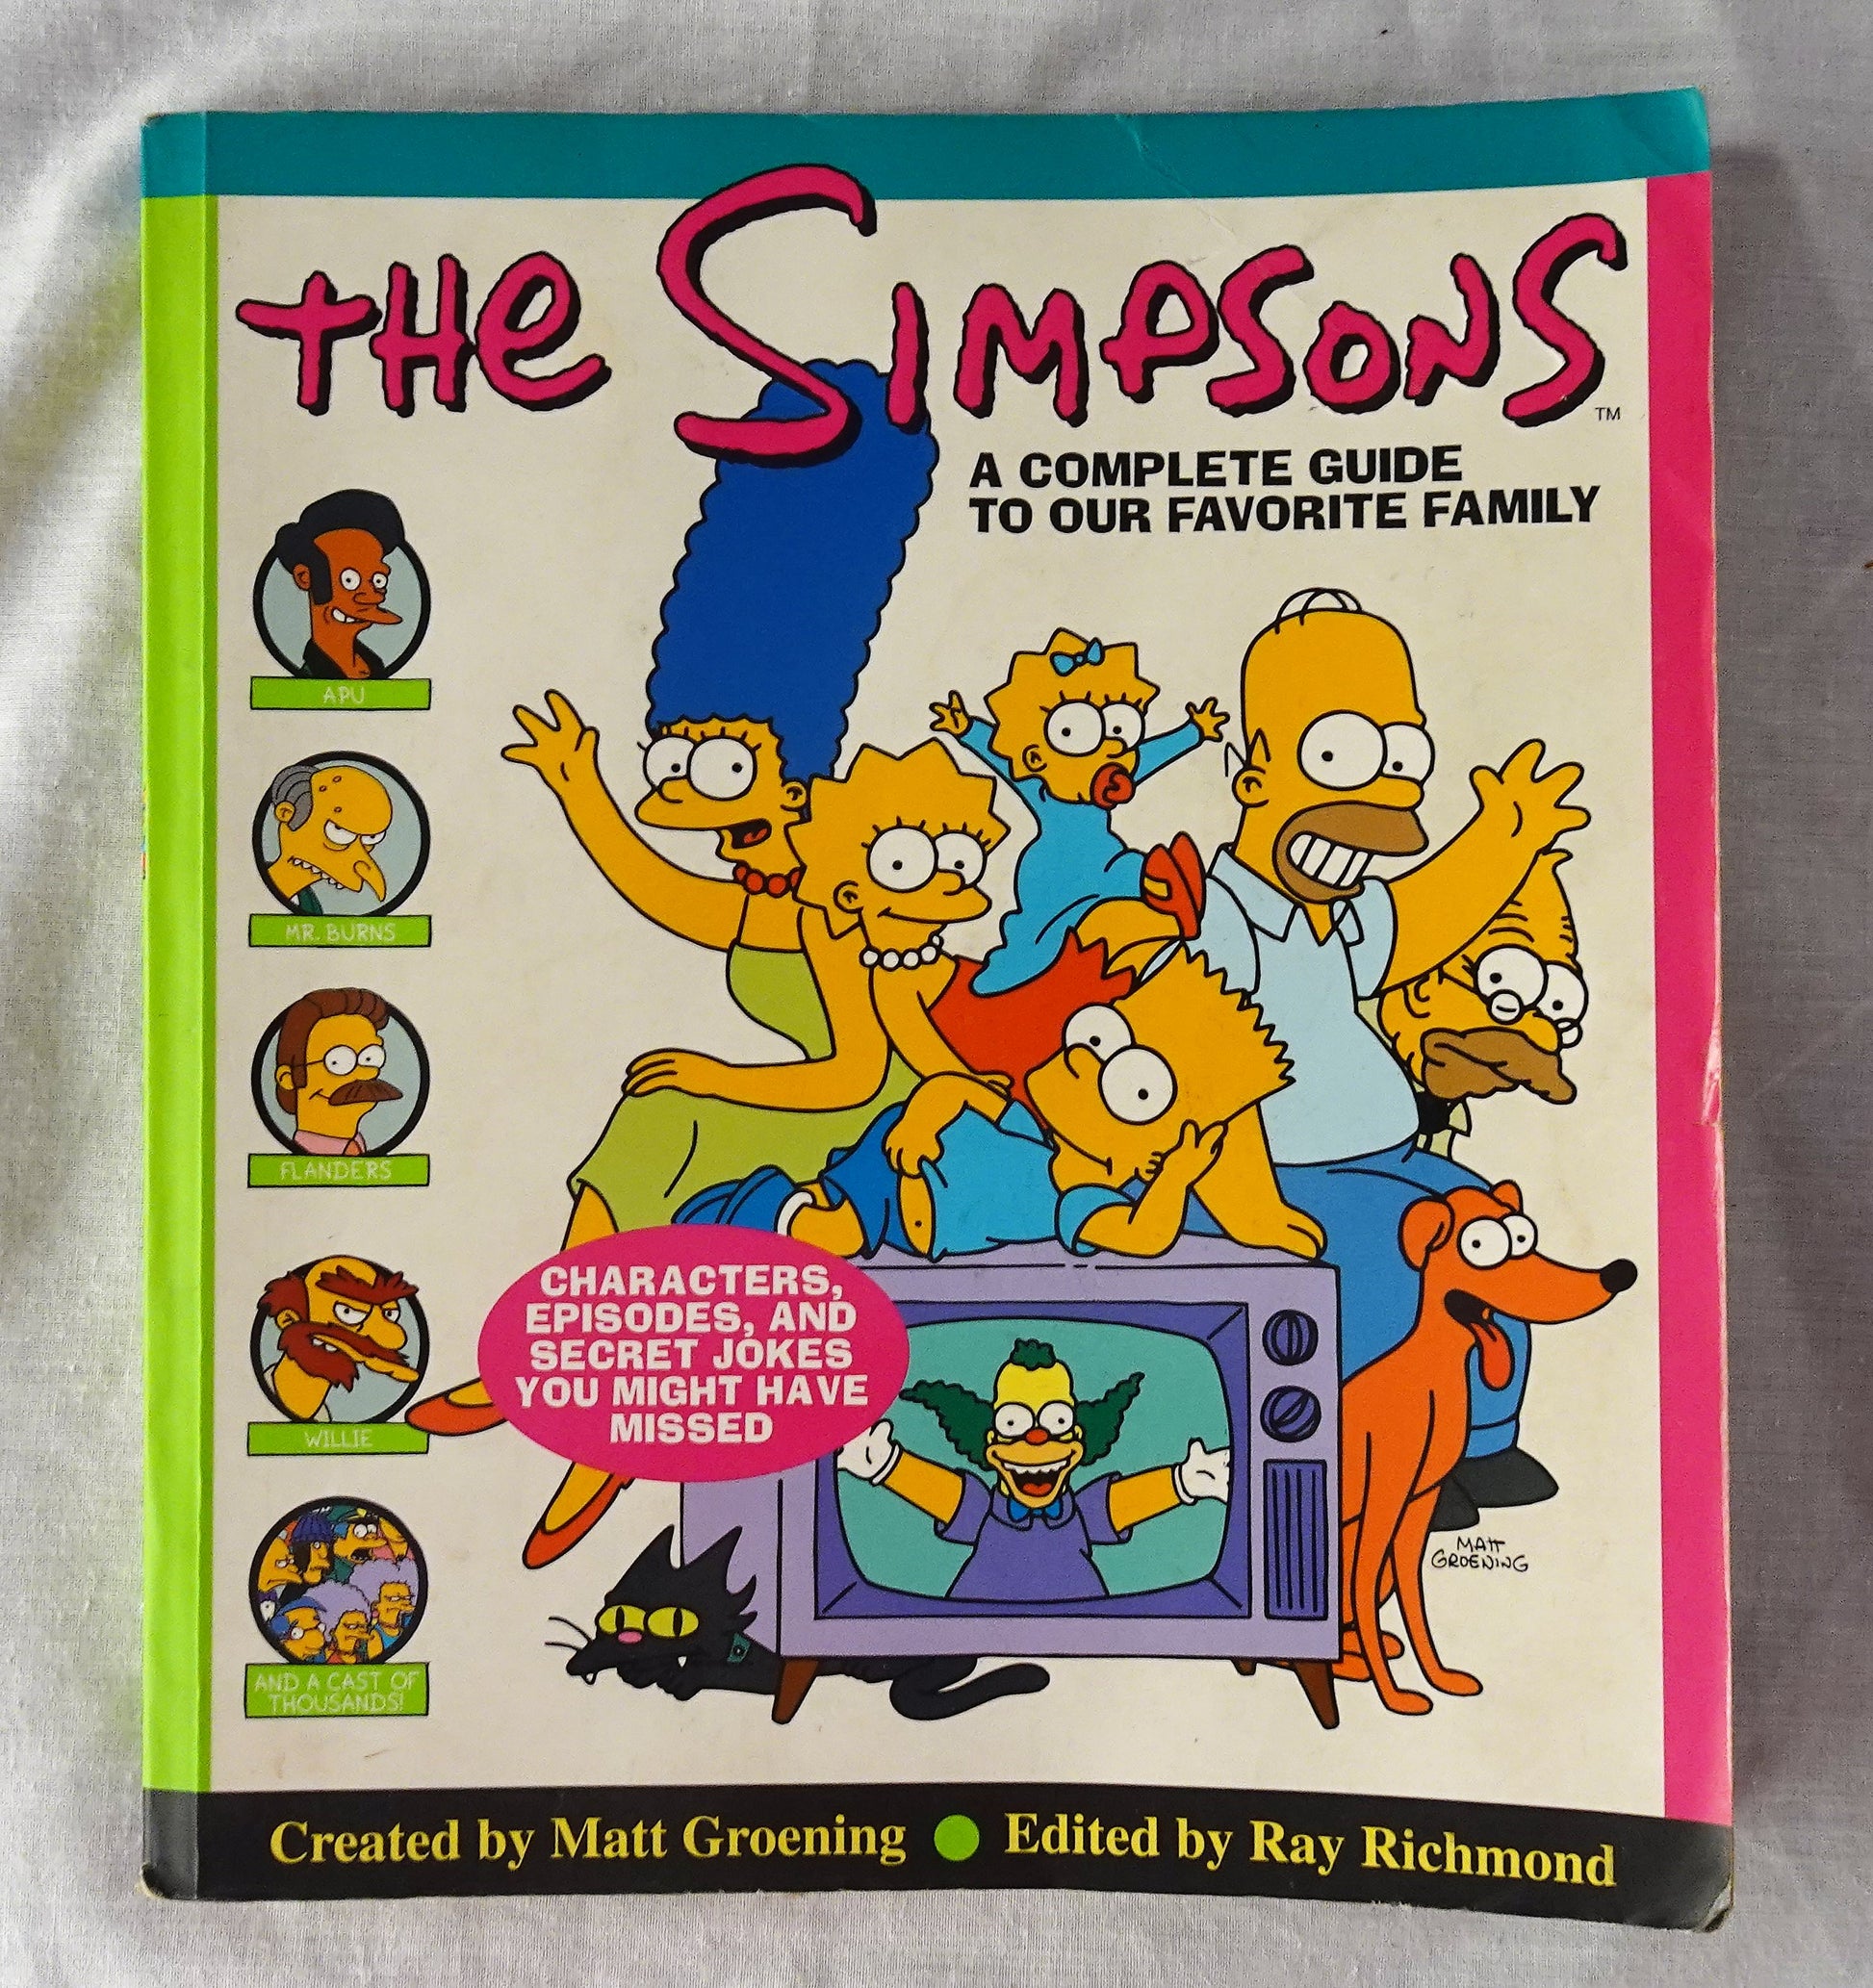 The Simpsons  A Complete Guide to our Favorite Family  Created by Matt Groening  Edited by Ray Richmond and Antonia Coffman